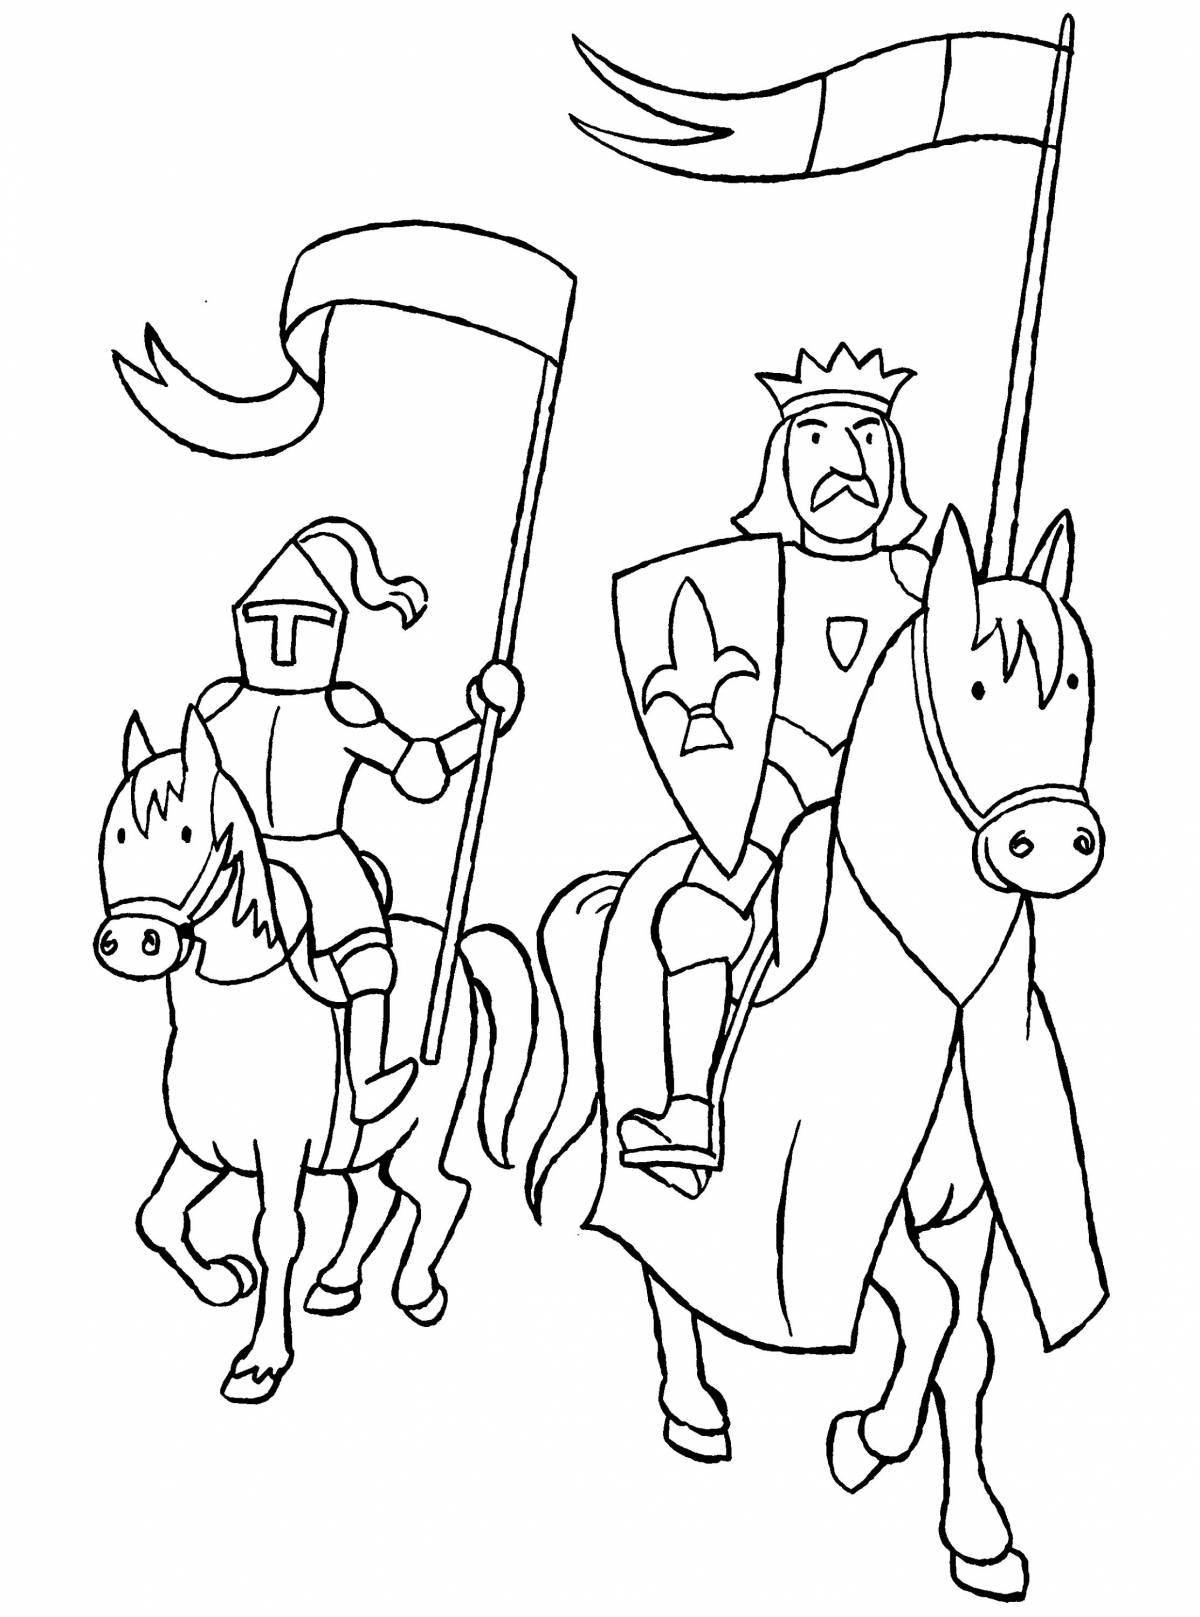 A wonderful historical coloring book for kids